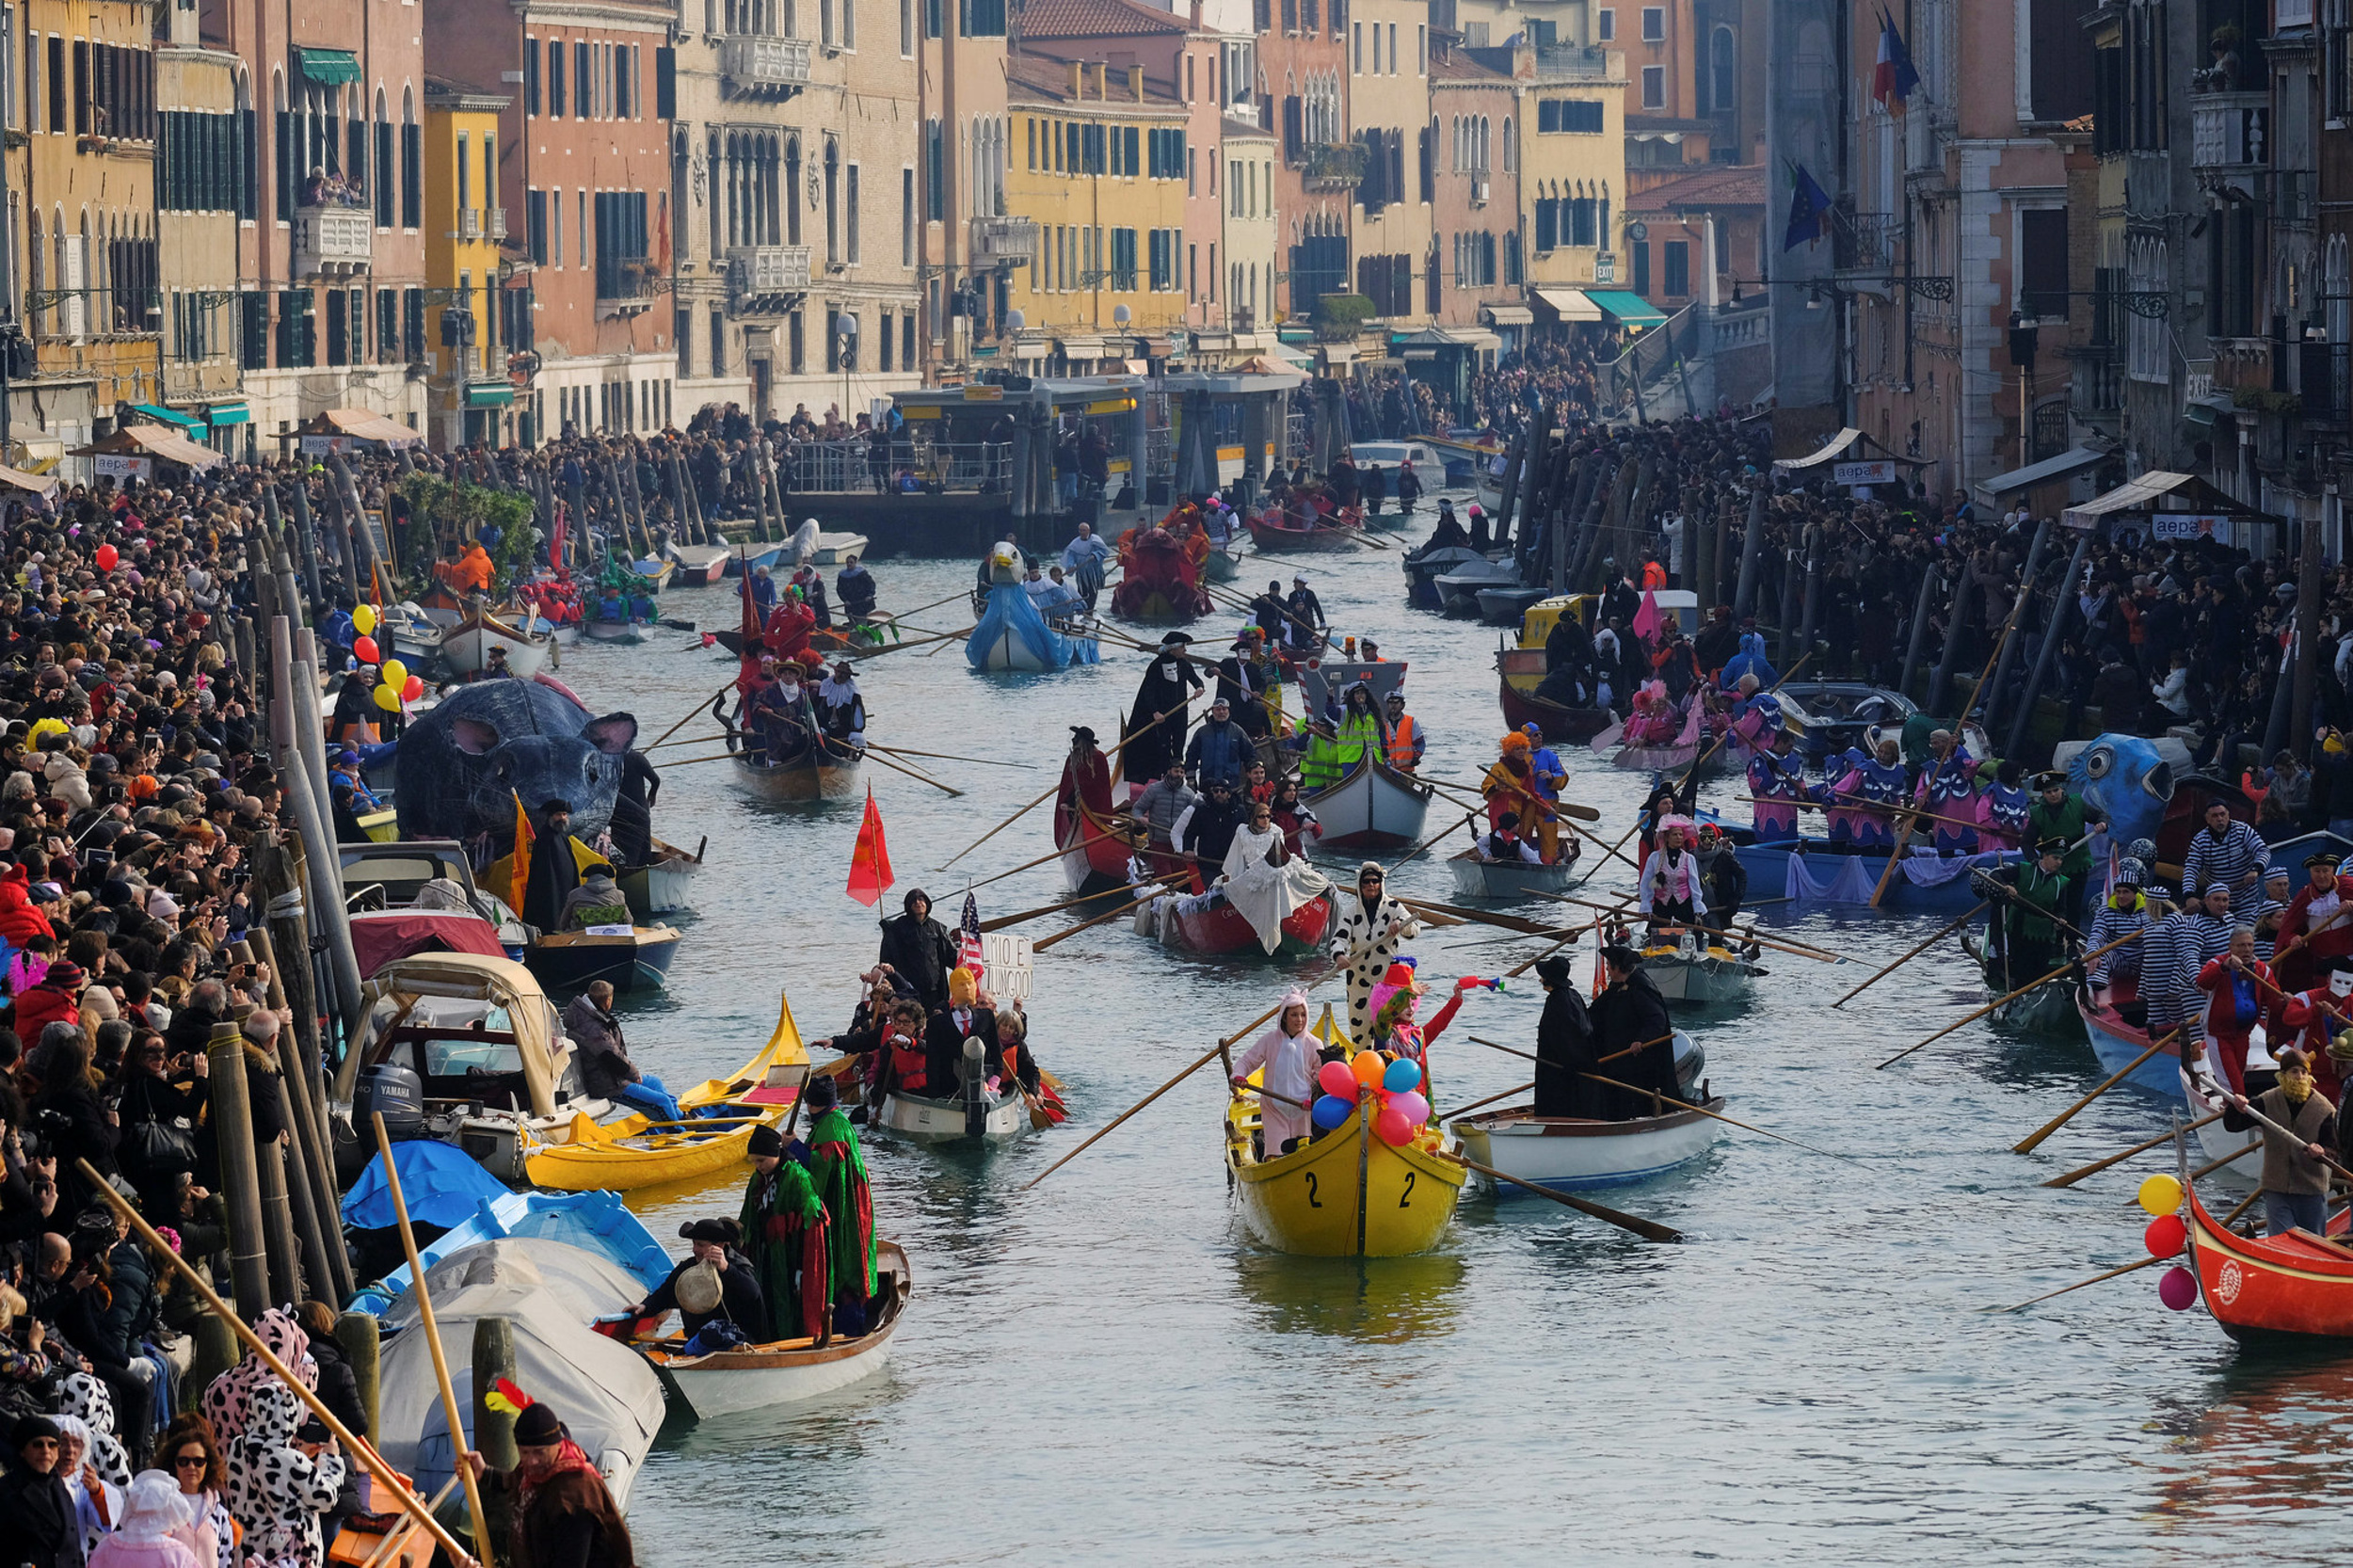 <p>Every February, the city hosts a carnival where three million people dress up in costumes and dance until dawn. It's the closest thing to Fellini-esque Venice has to offer. </p><p>You may also like: <a href='https://www.yardbarker.com/lifestyle/articles/cold_as_ice_20_foods_that_freeze_the_best_031524/s1__34465163'>Cold as ice: 20 foods that freeze the best</a></p>